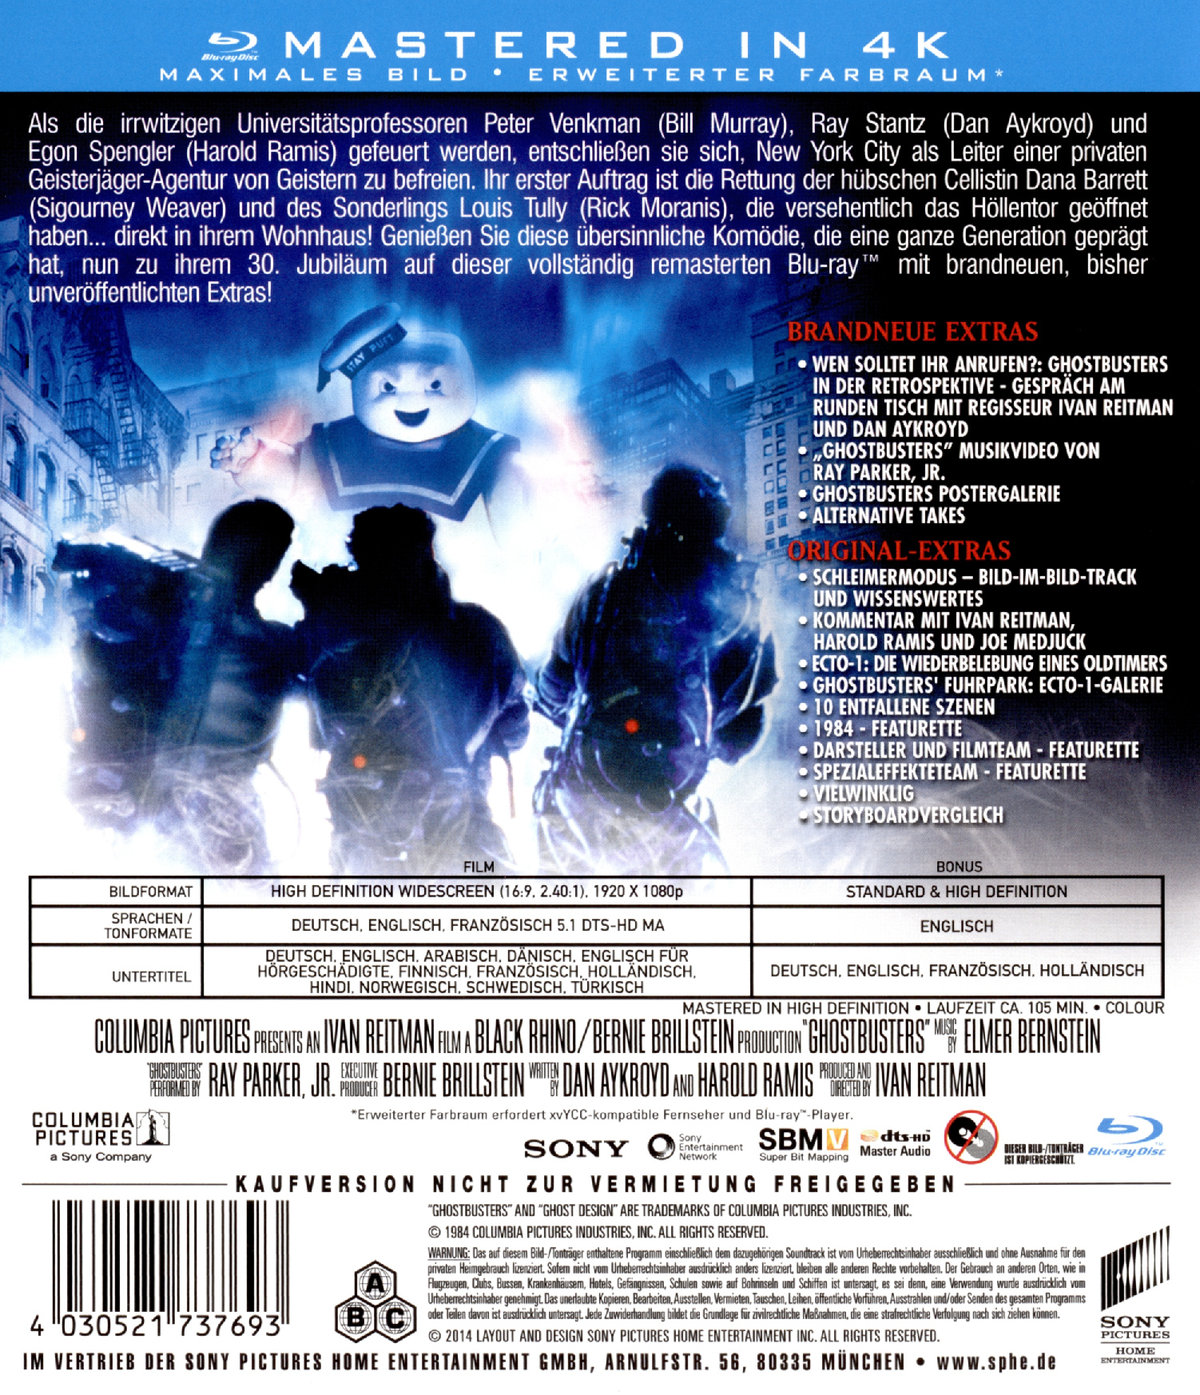 Ghostbusters - Deluxe Edition (blu-ray)